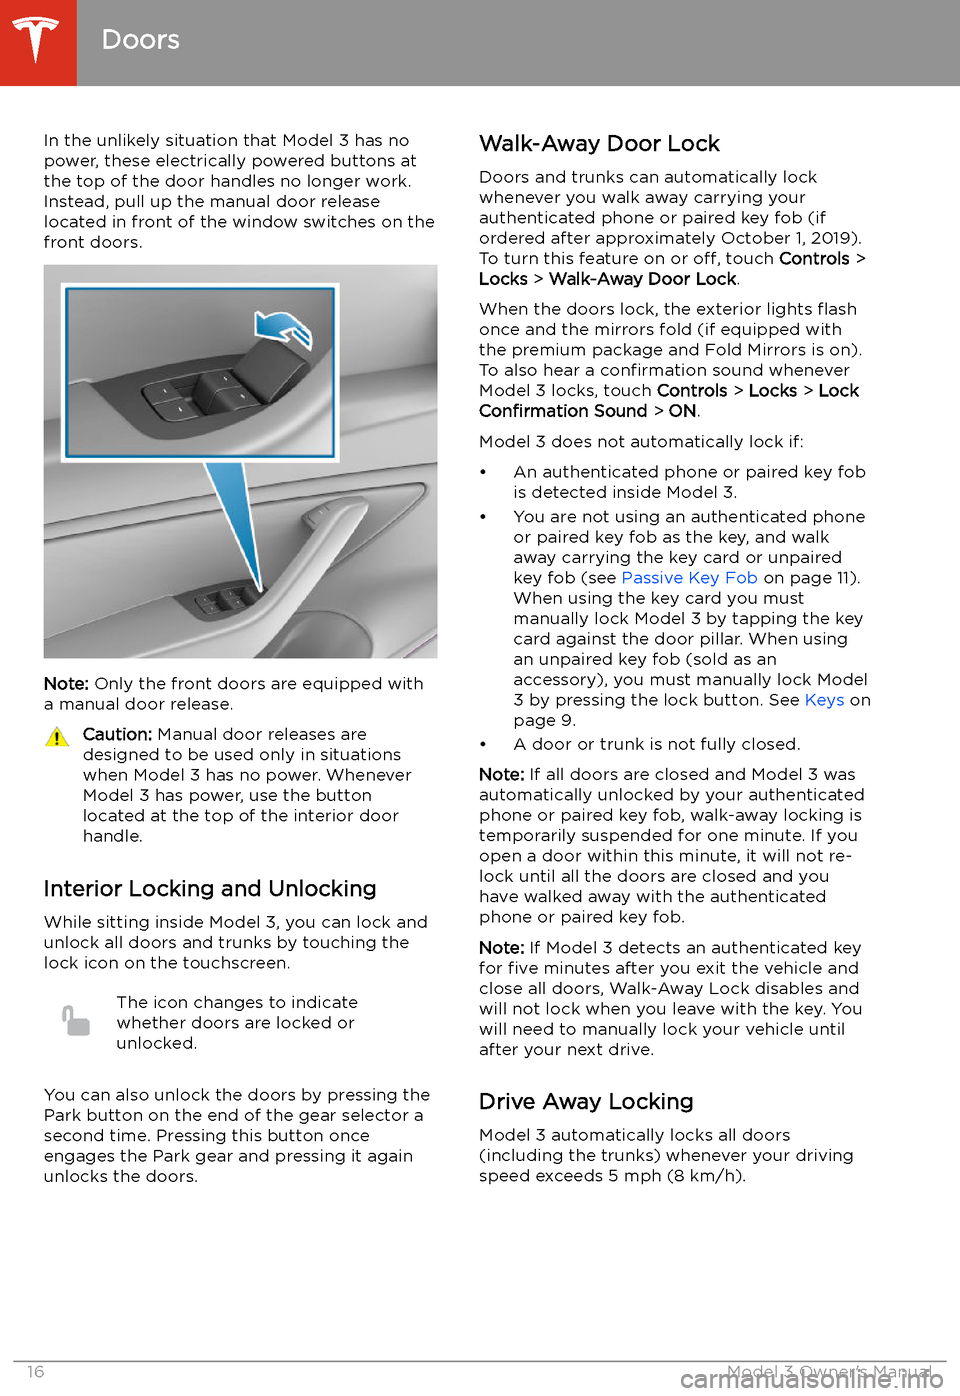 TESLA MODEL 3 2020  s User Guide In the unlikely situation that Model 3 has nopower, these electrically powered buttons at
the top of the door handles no longer work.
Instead, pull up the manual door release
located in front of the w